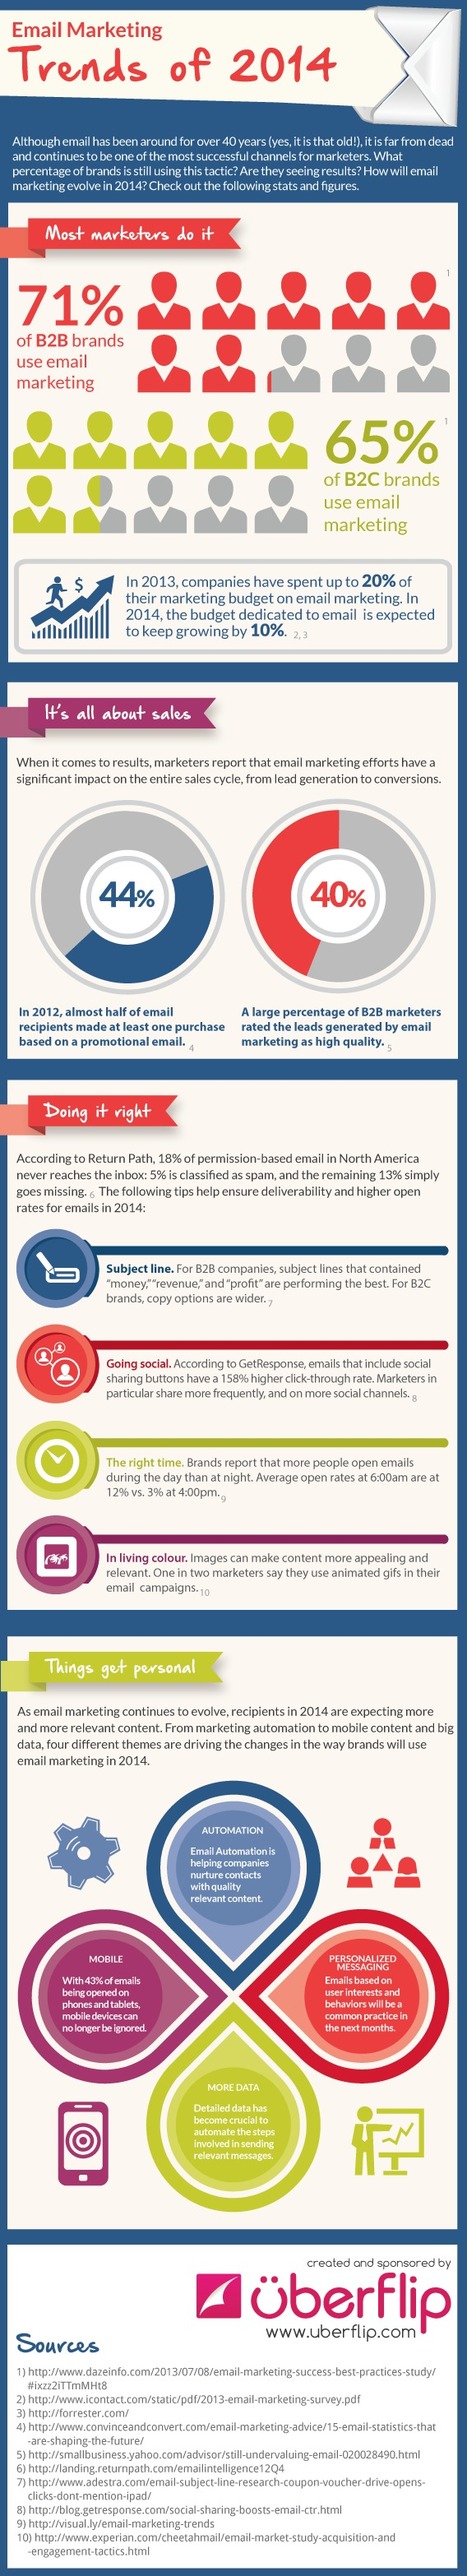 Infographic: Email Marketing Trends In 2014 |  Uberflip | #TheMarketingAutomationAlert | The MarTech Digest | Scoop.it